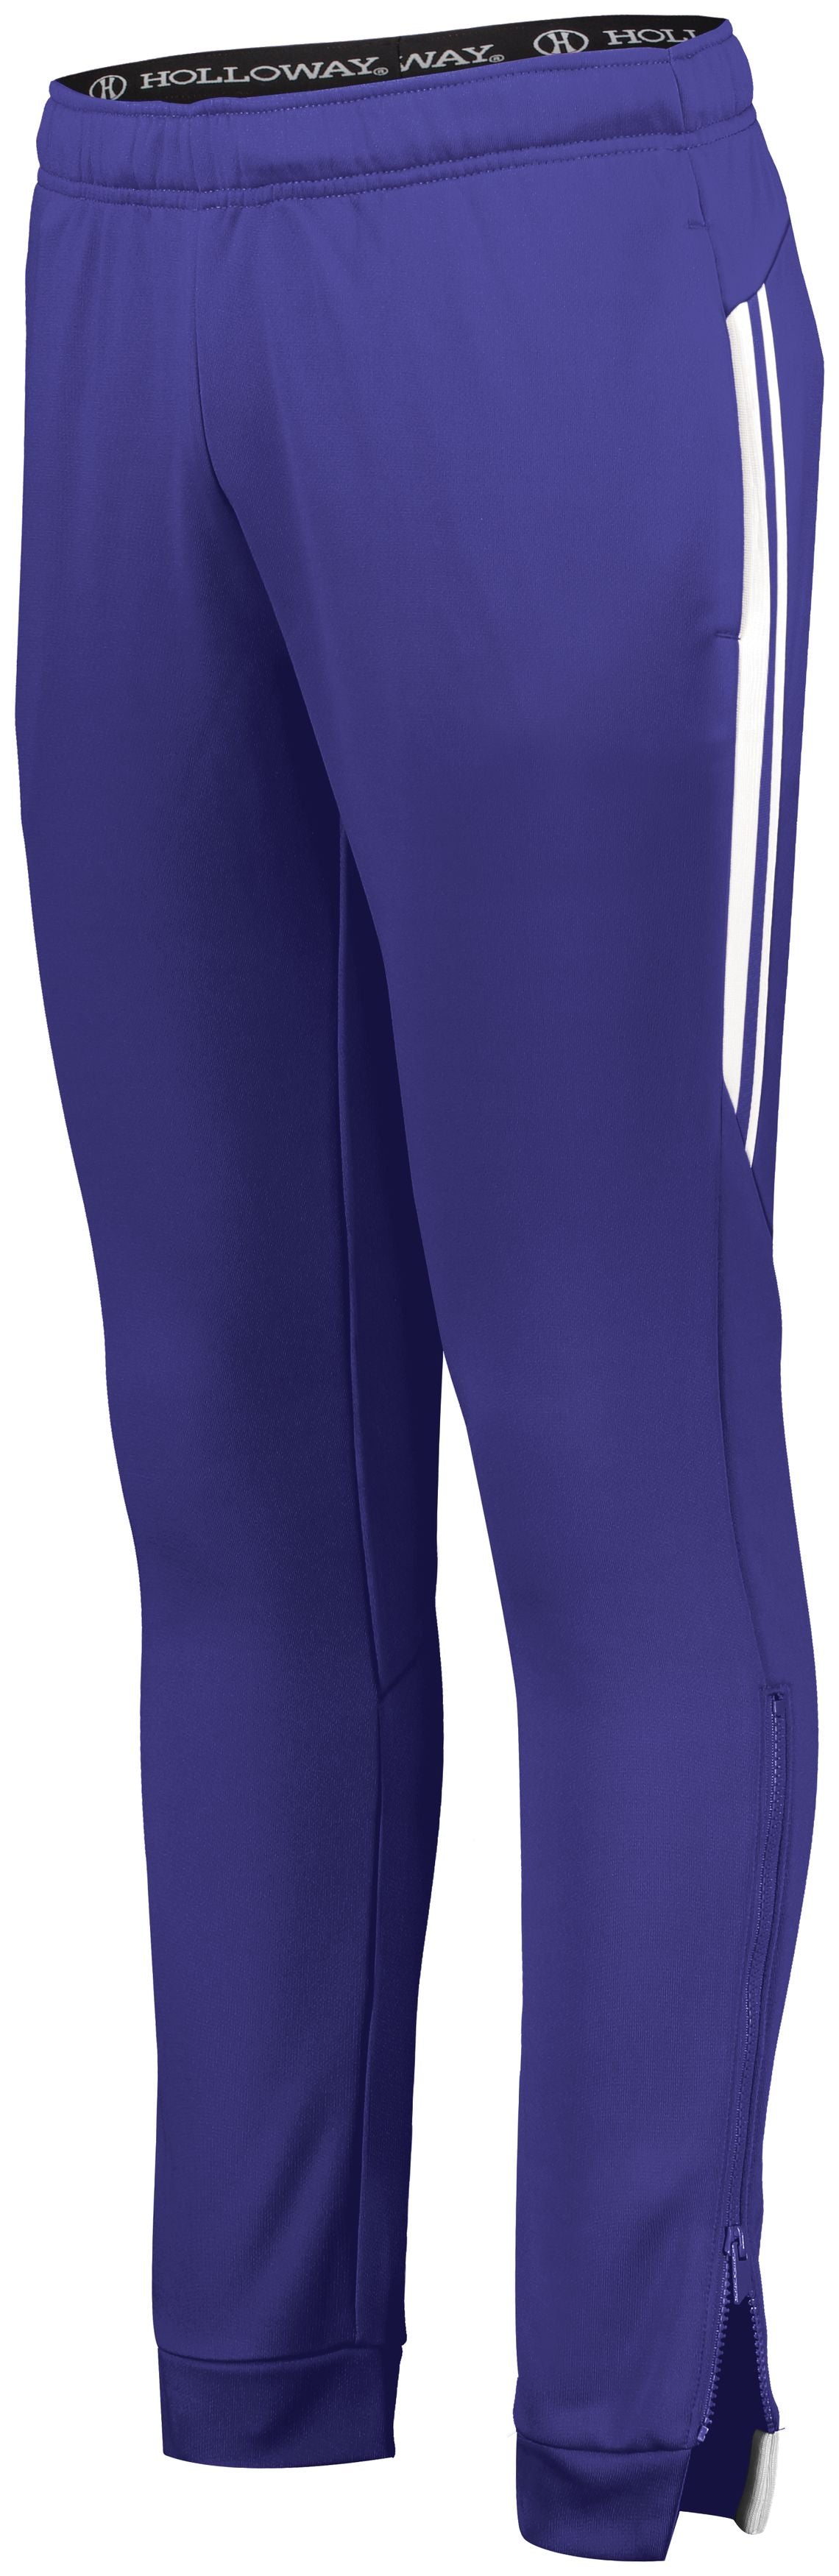 Holloway Ladies Retro Grade Pant in Purple/White  -Part of the Ladies, Ladies-Pants, Pants, Holloway product lines at KanaleyCreations.com